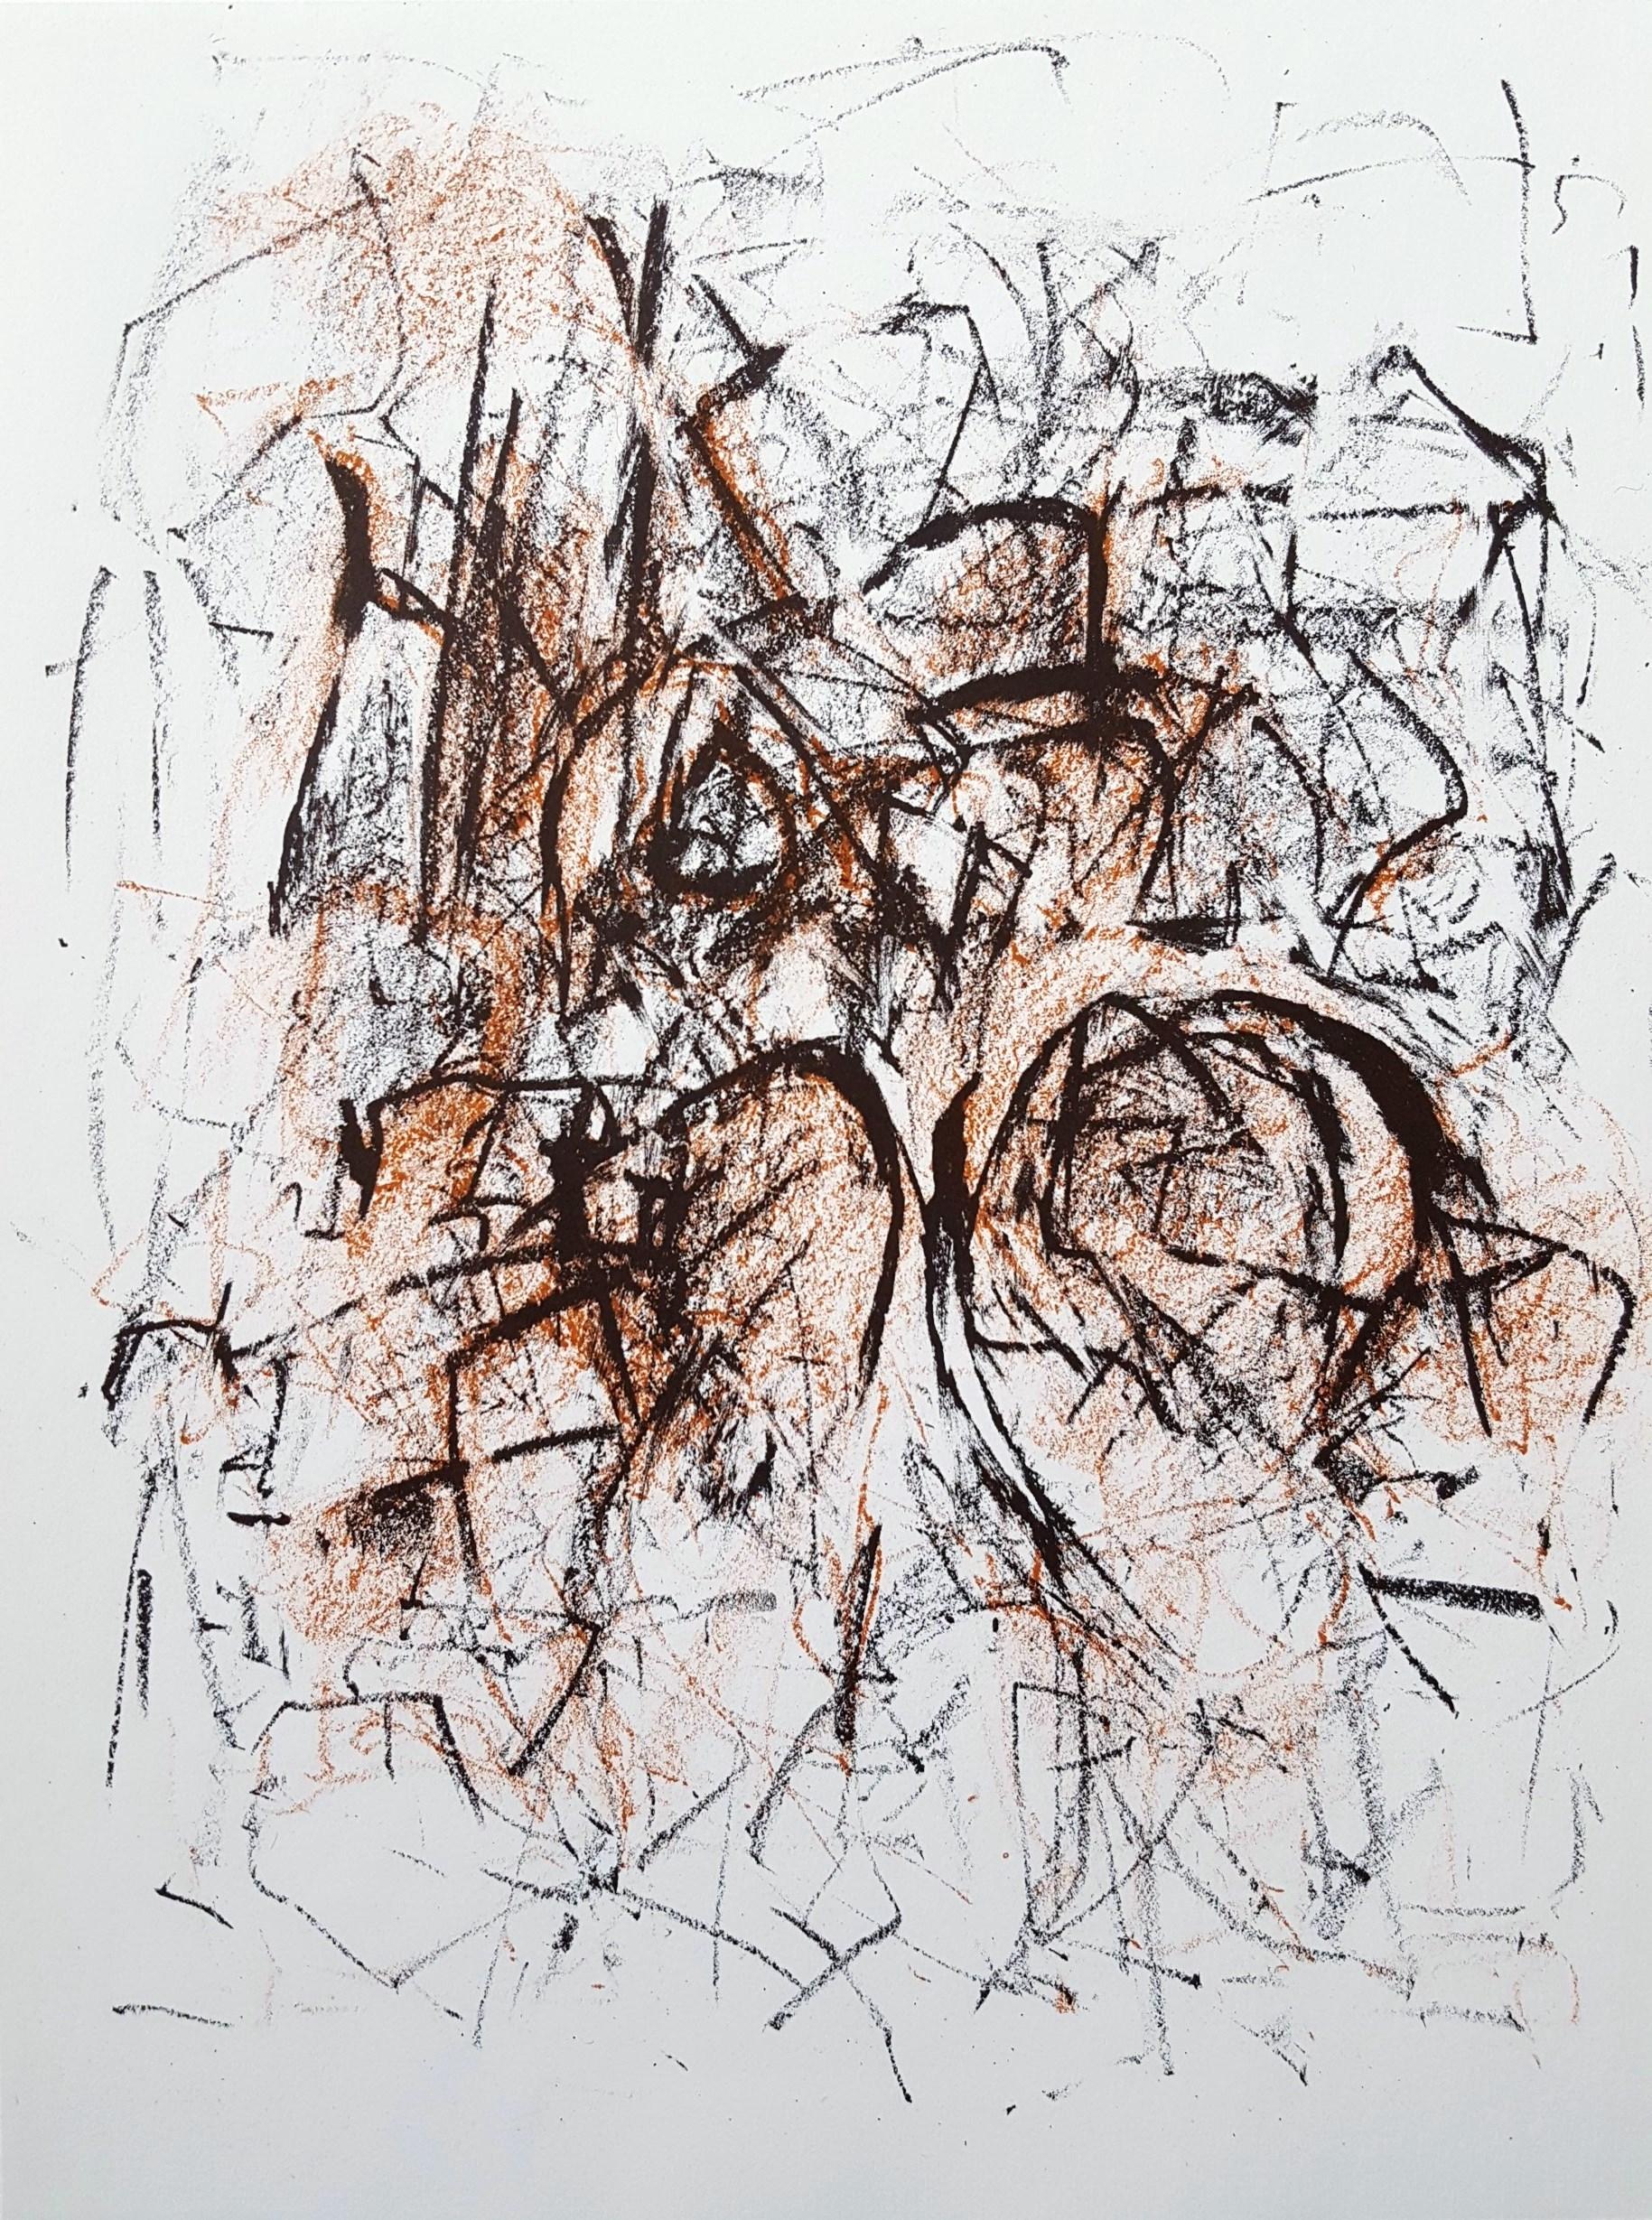 Joan Mitchell Abstract Print - Meditations in an Emergency /// Abstract Expressionist Female Artist Post-War NY